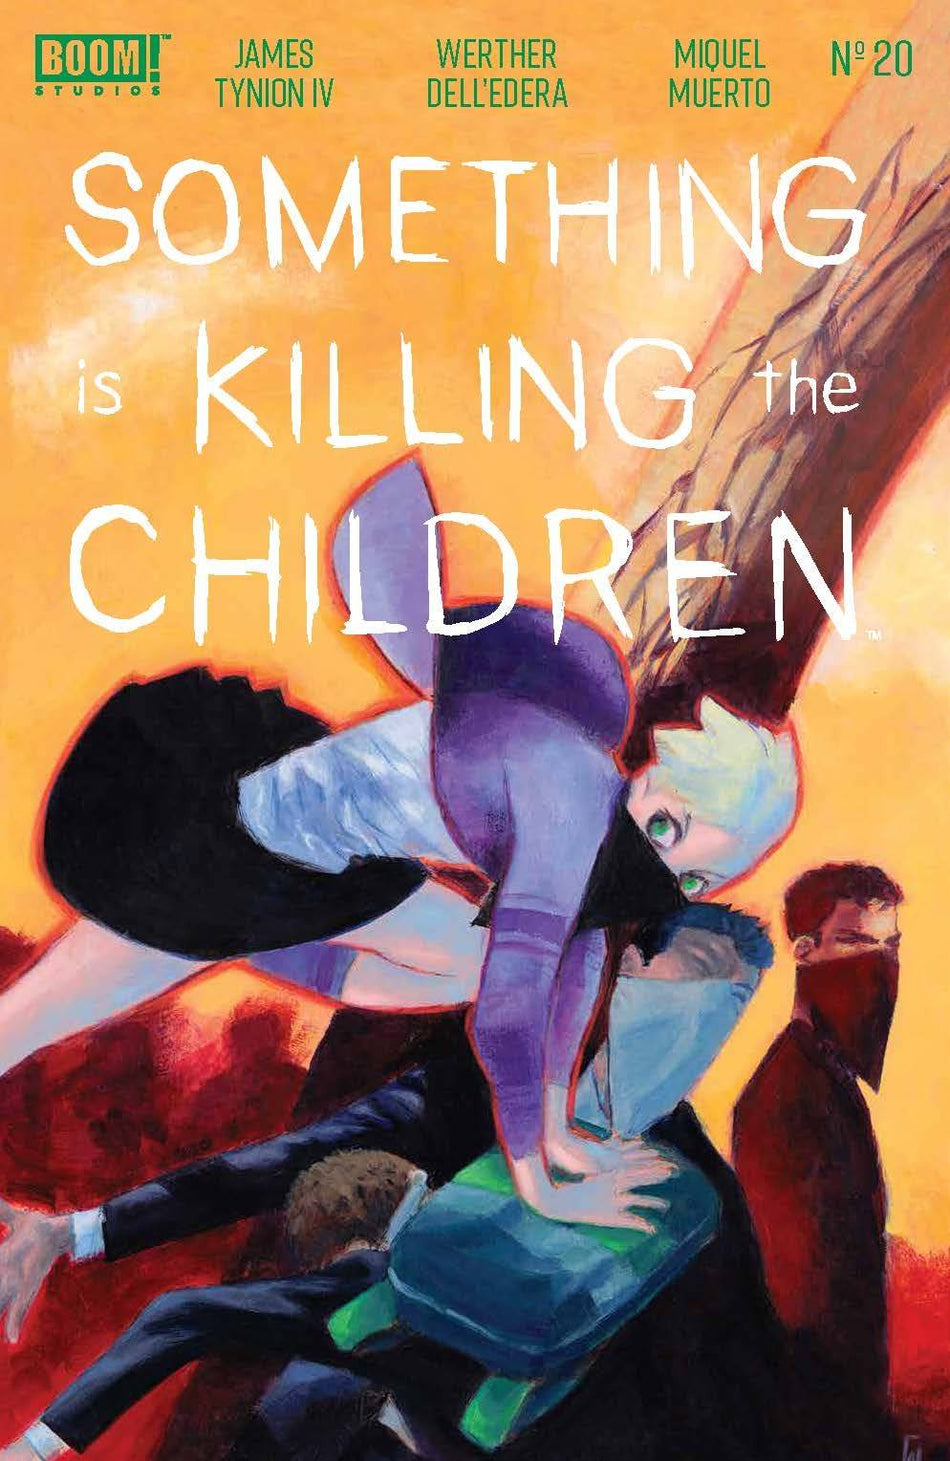 Something Is Killing the Children Issue 20 CVR A Dell Edera